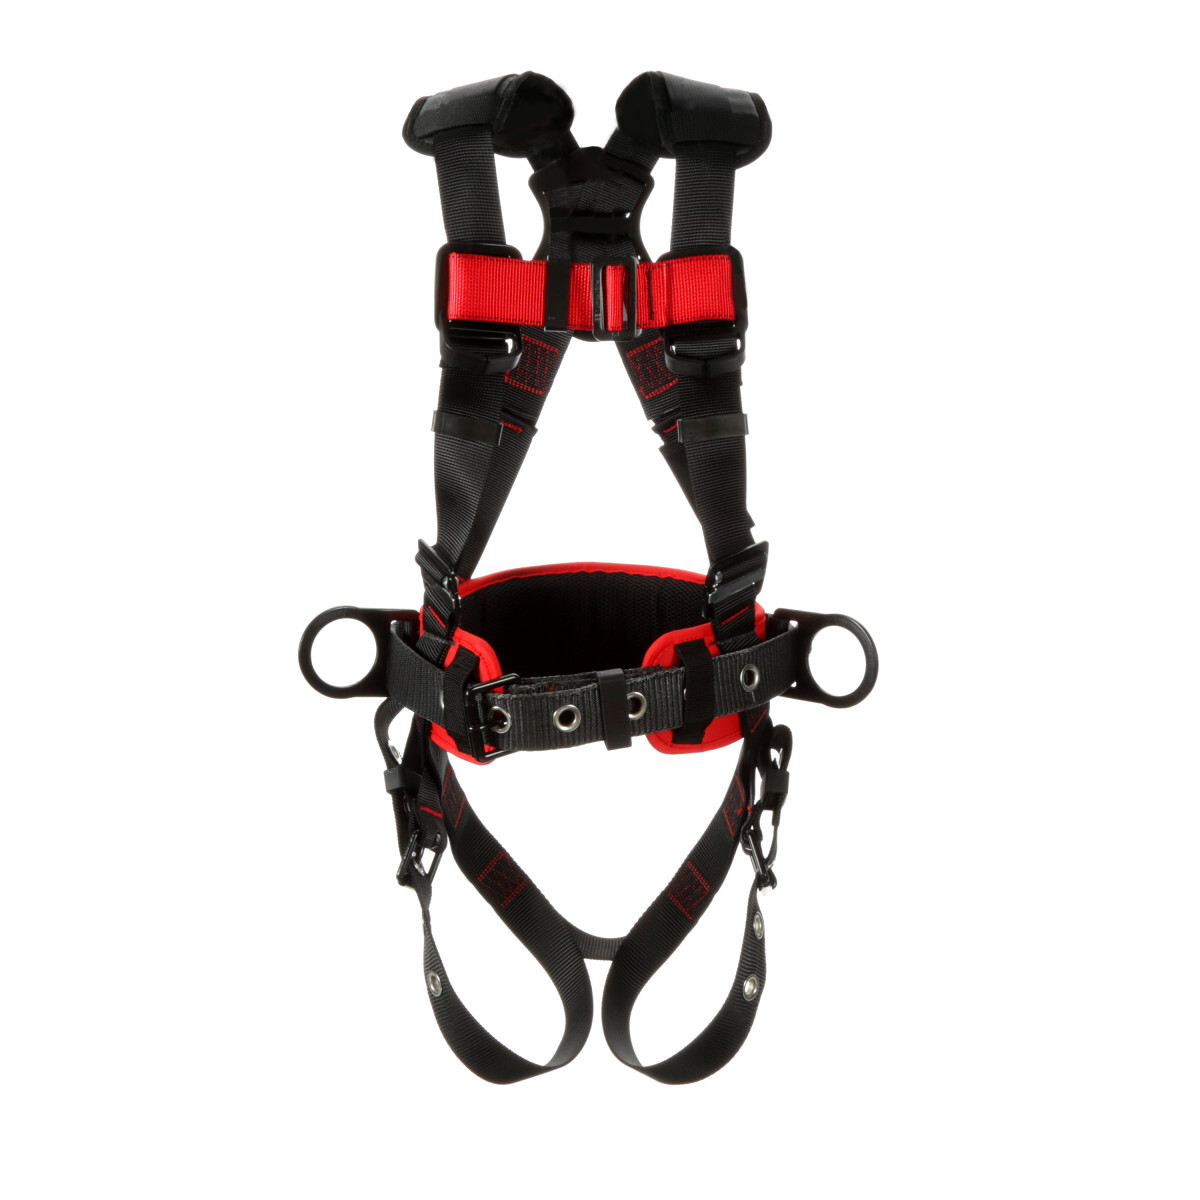 3M™ Protecta® Small Construction Style Full Body Positioning Harness With Auto-Resetting Lanyard Keeper And Impact Indicator